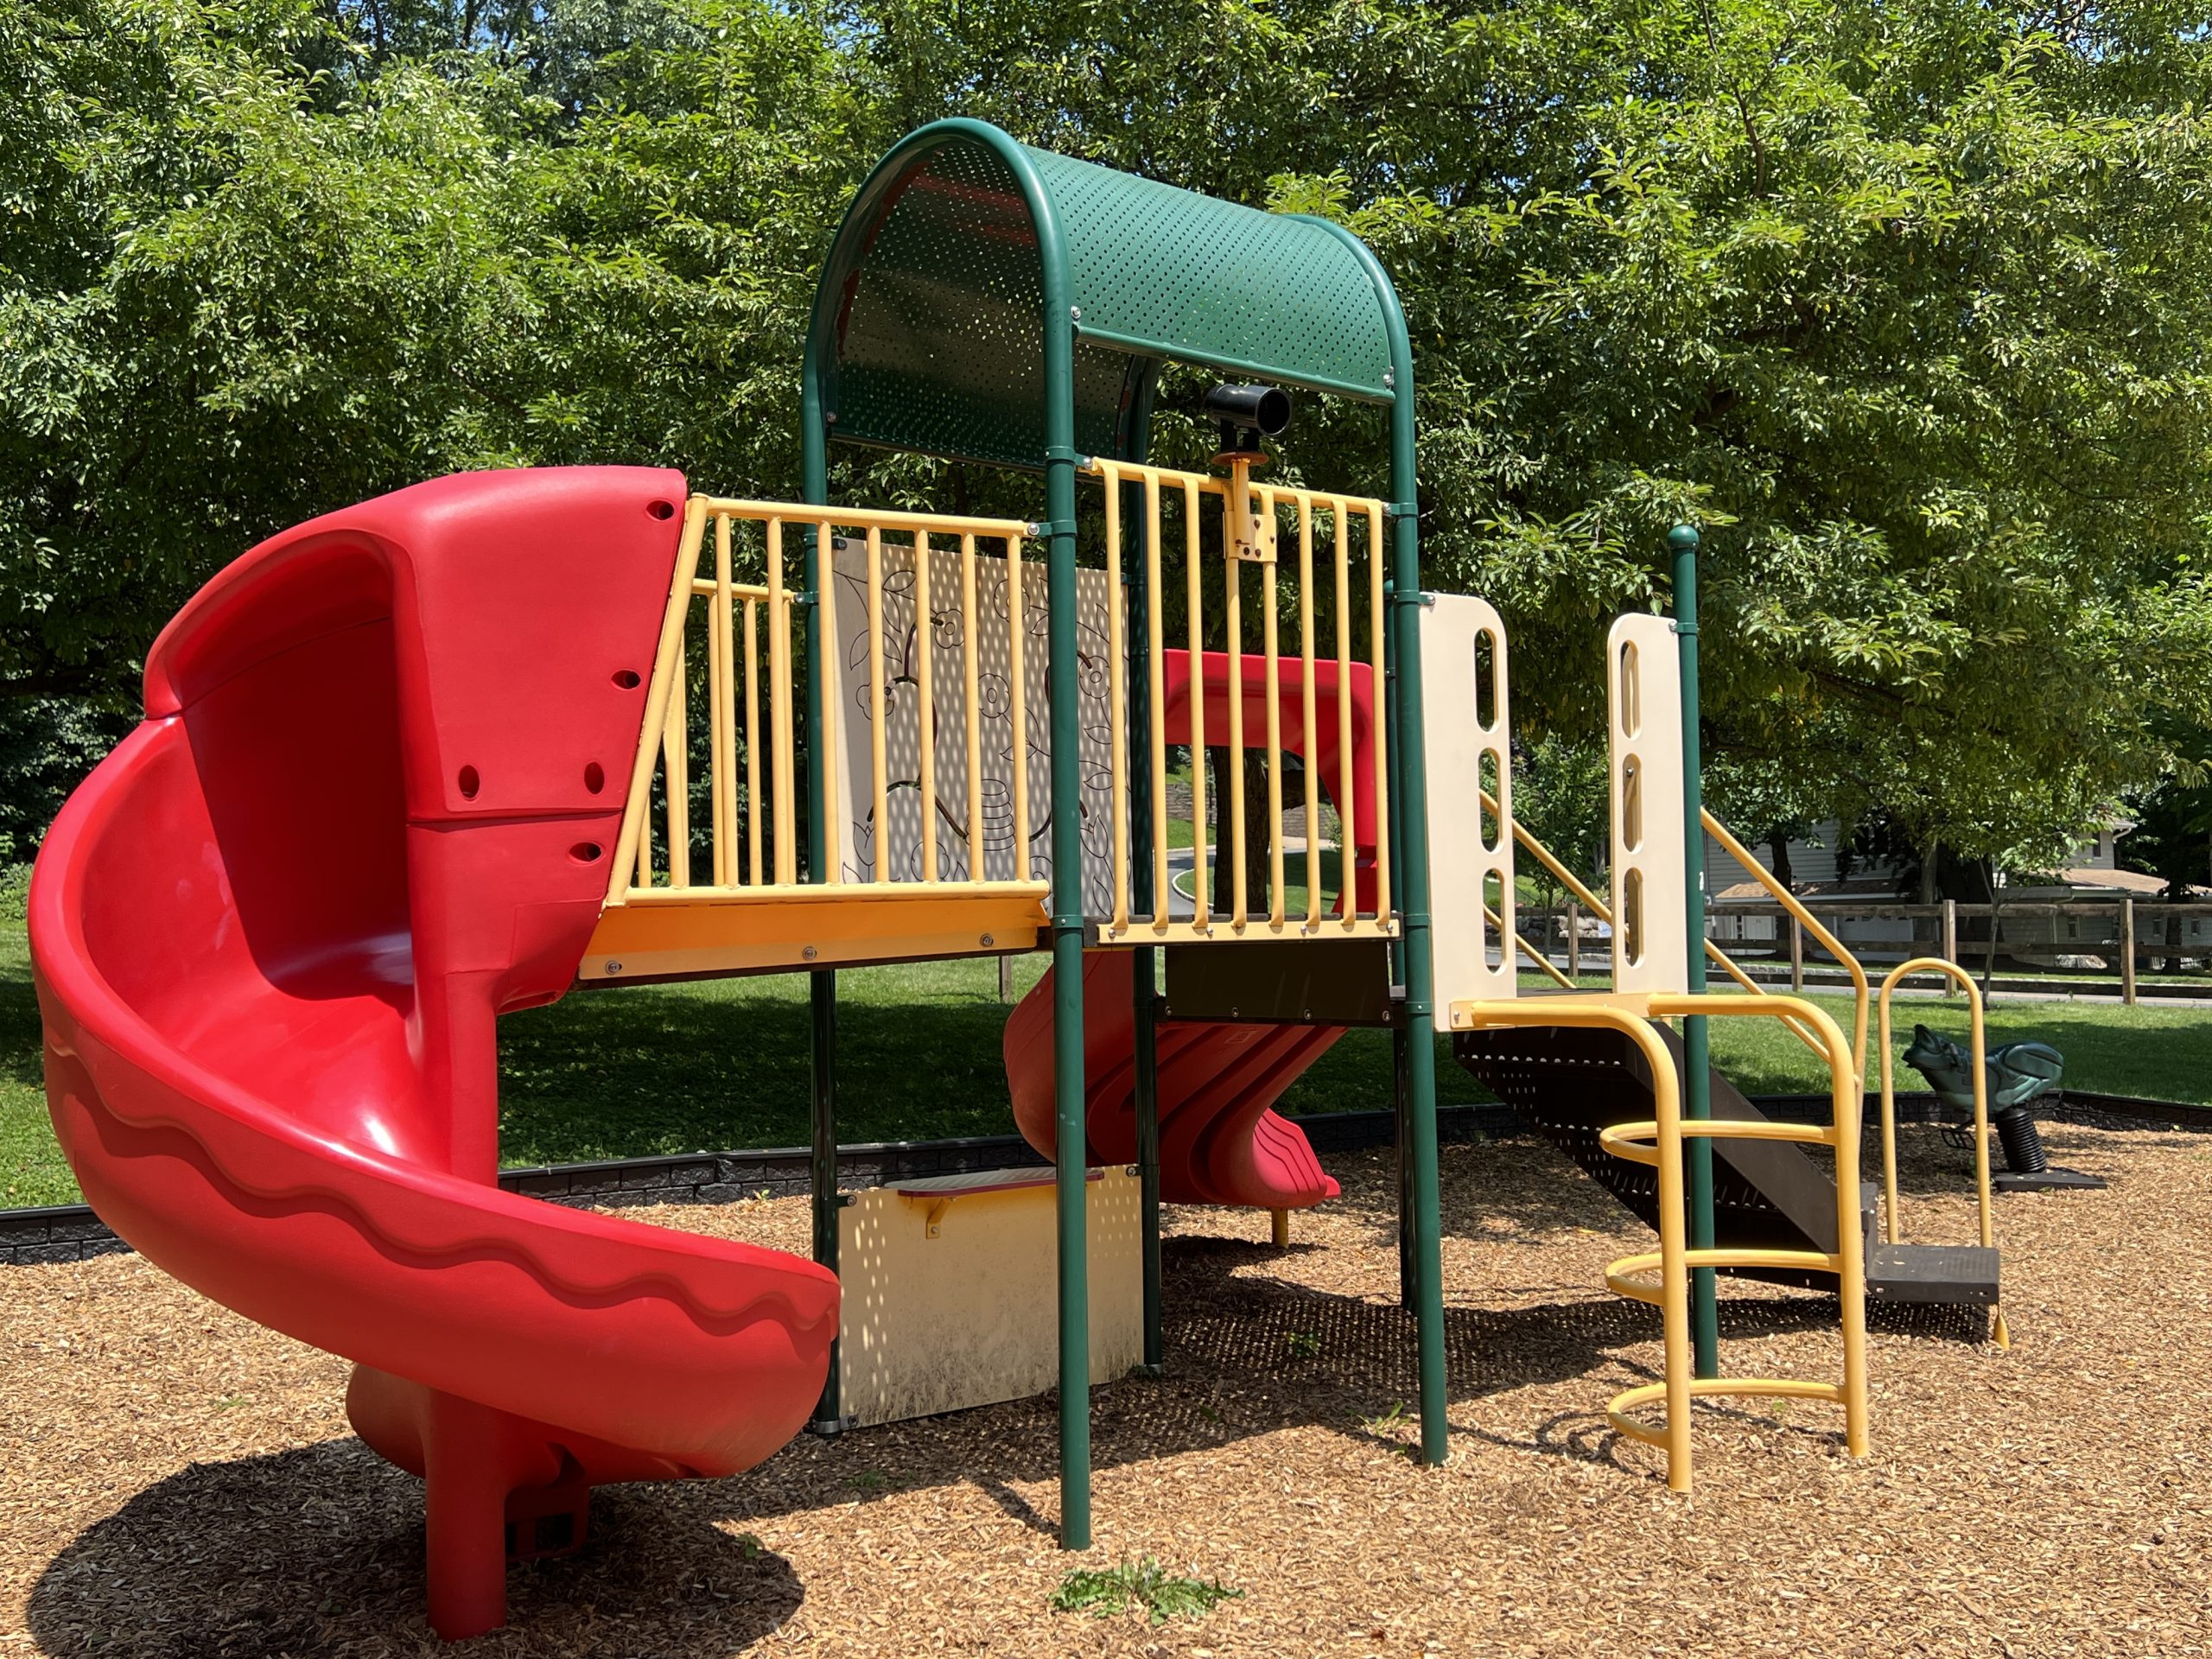 Lake Musconetcong Park Playground in Stanhope NJ - WIDE image - red slide structure with red twisting SLIDE opposite side